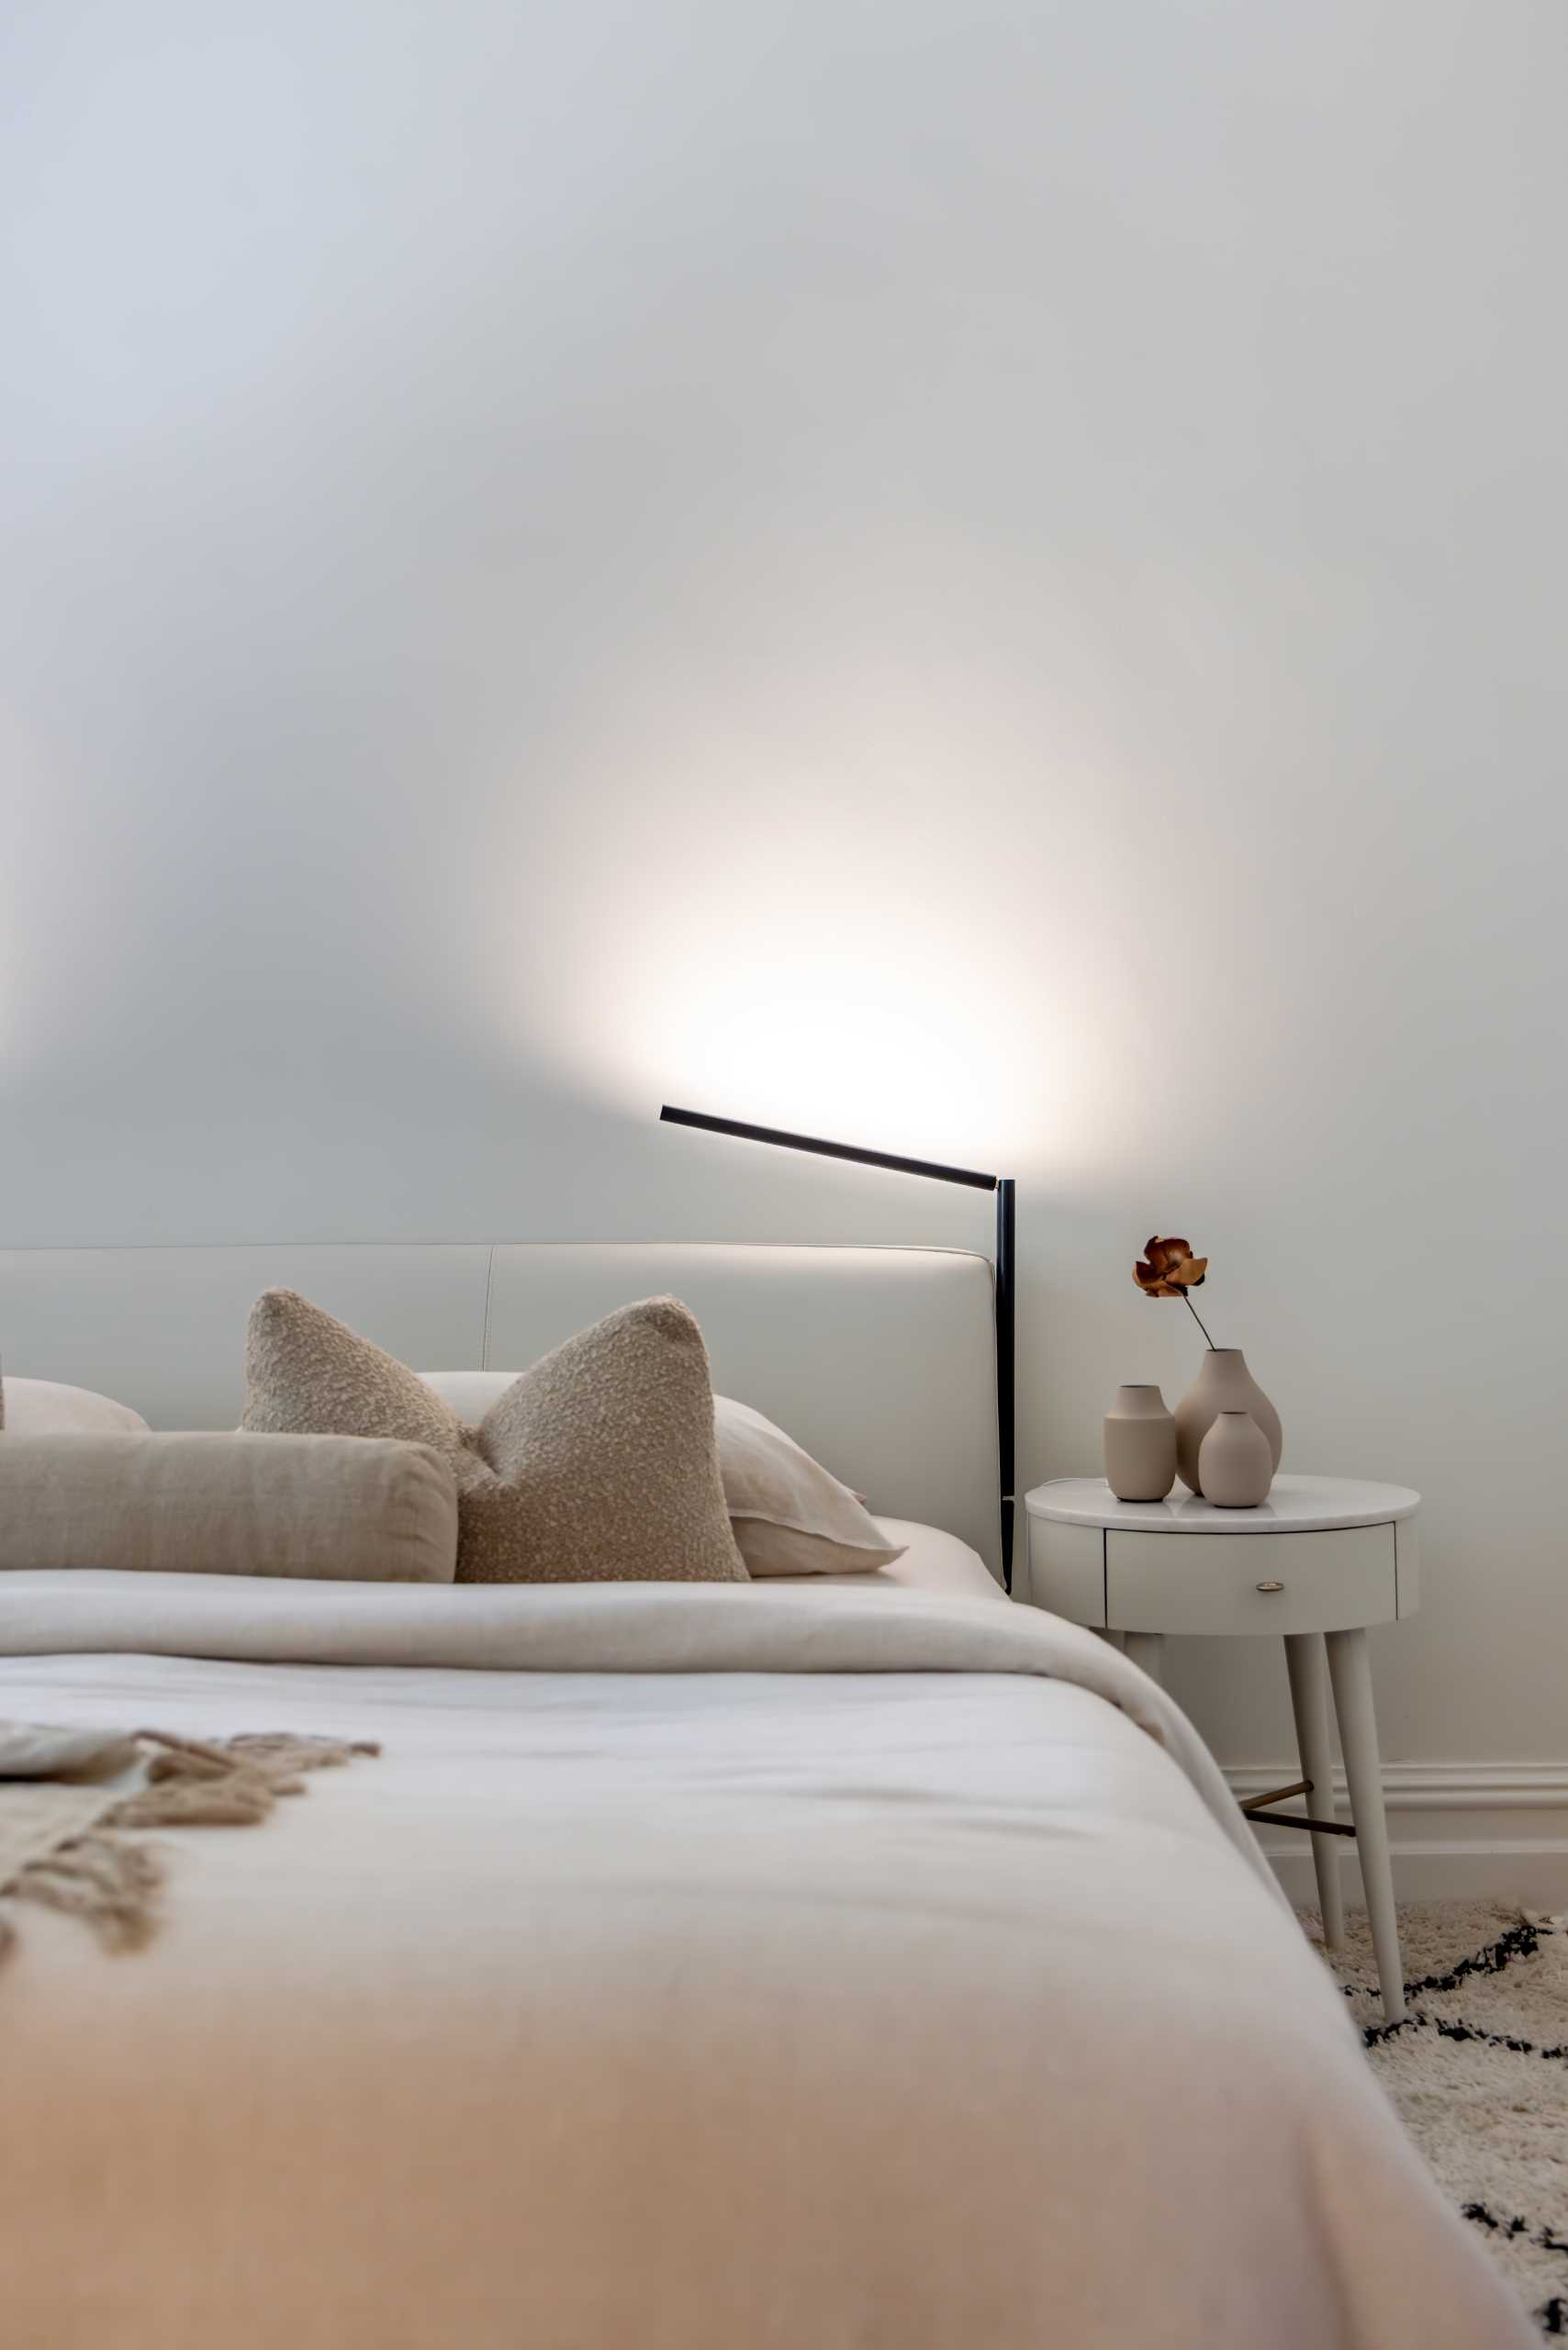 A minimalist design was c،sen for the bedroom, with neutral furni،ngs and color palette.